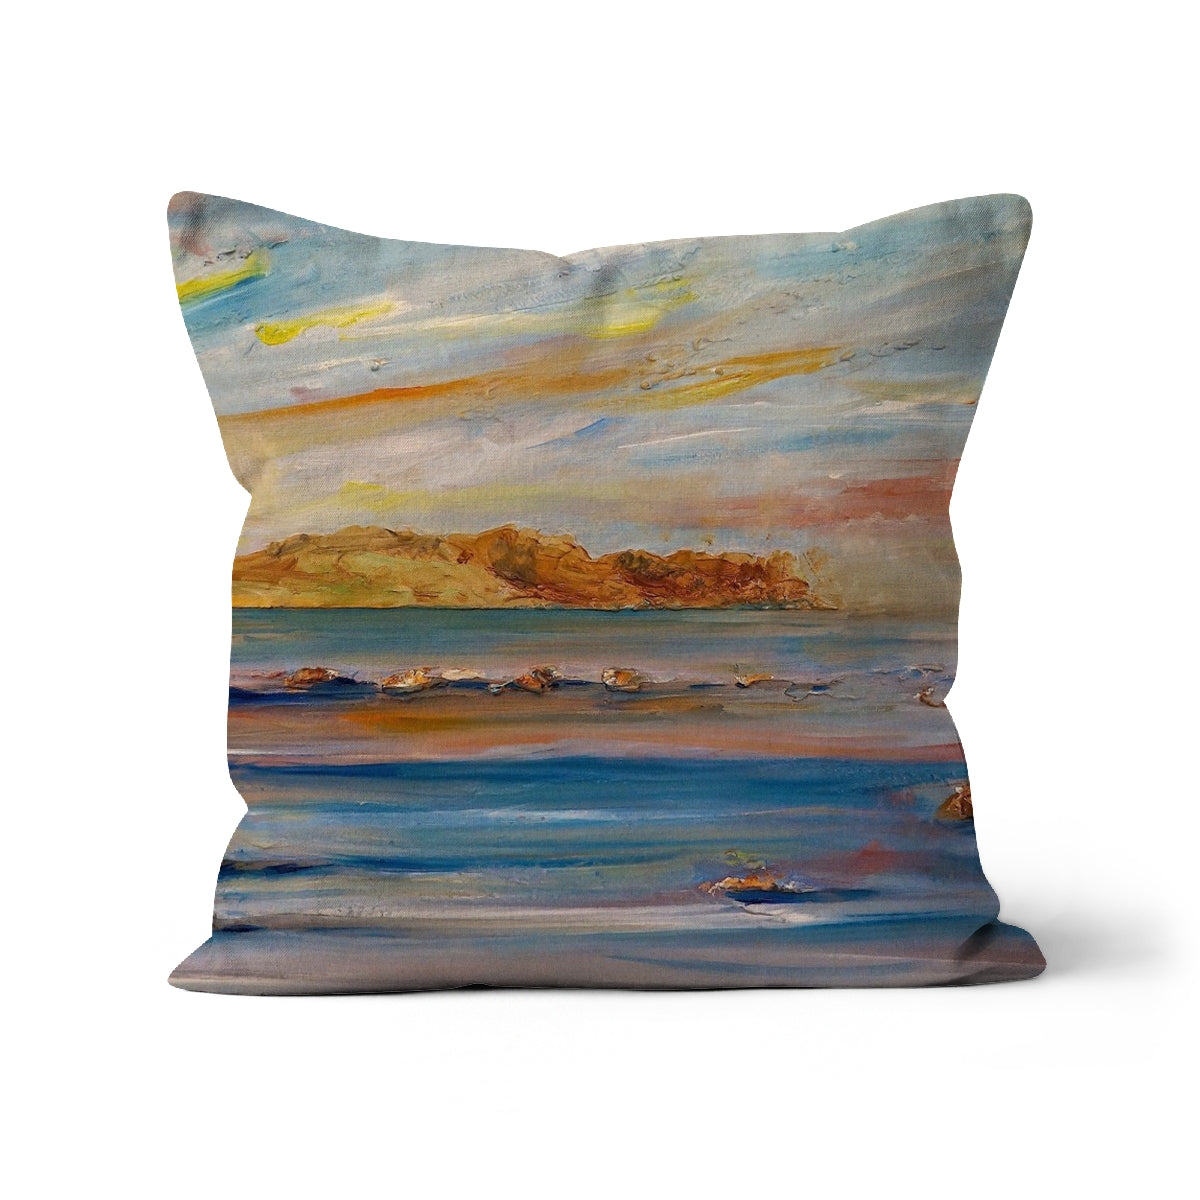 Tiree Dawn Art Gifts Cushion-Cushions-Hebridean Islands Art Gallery-Canvas-22"x22"-Paintings, Prints, Homeware, Art Gifts From Scotland By Scottish Artist Kevin Hunter